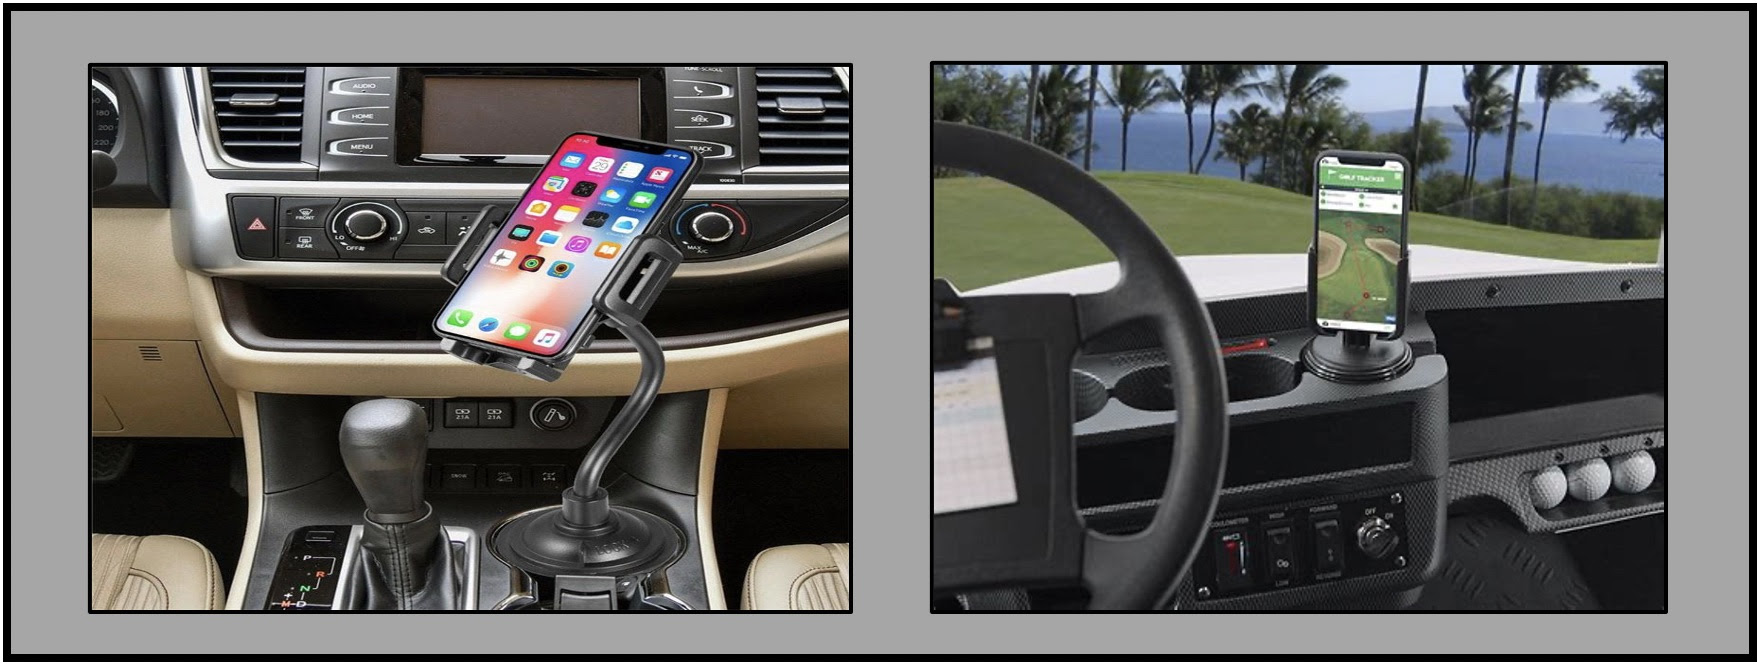 Use a dashboard phone holder to record quality videos with Shortcuts and Siri.